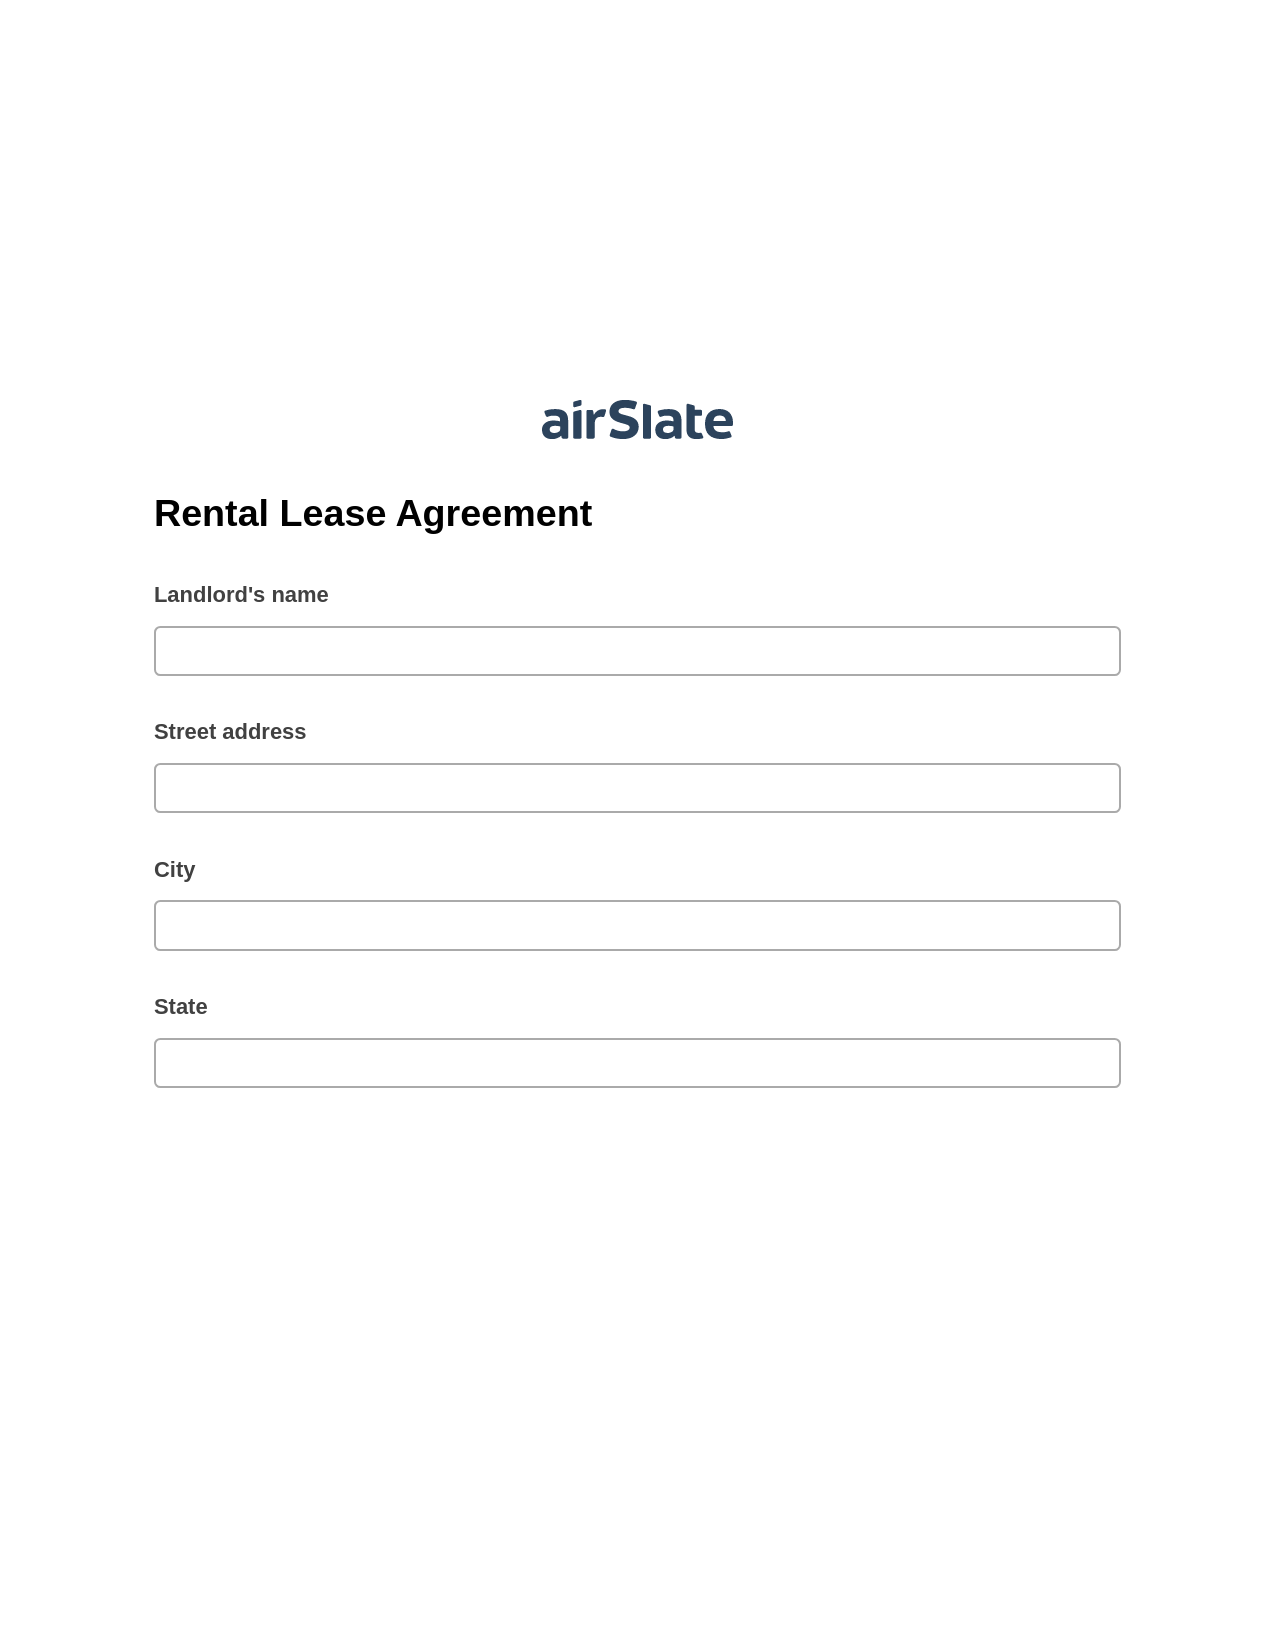 Rental Lease Agreement Pre-fill from NetSuite Records Bot, Export to MS Dynamics 365 Bot, Export to Excel 365 Bot